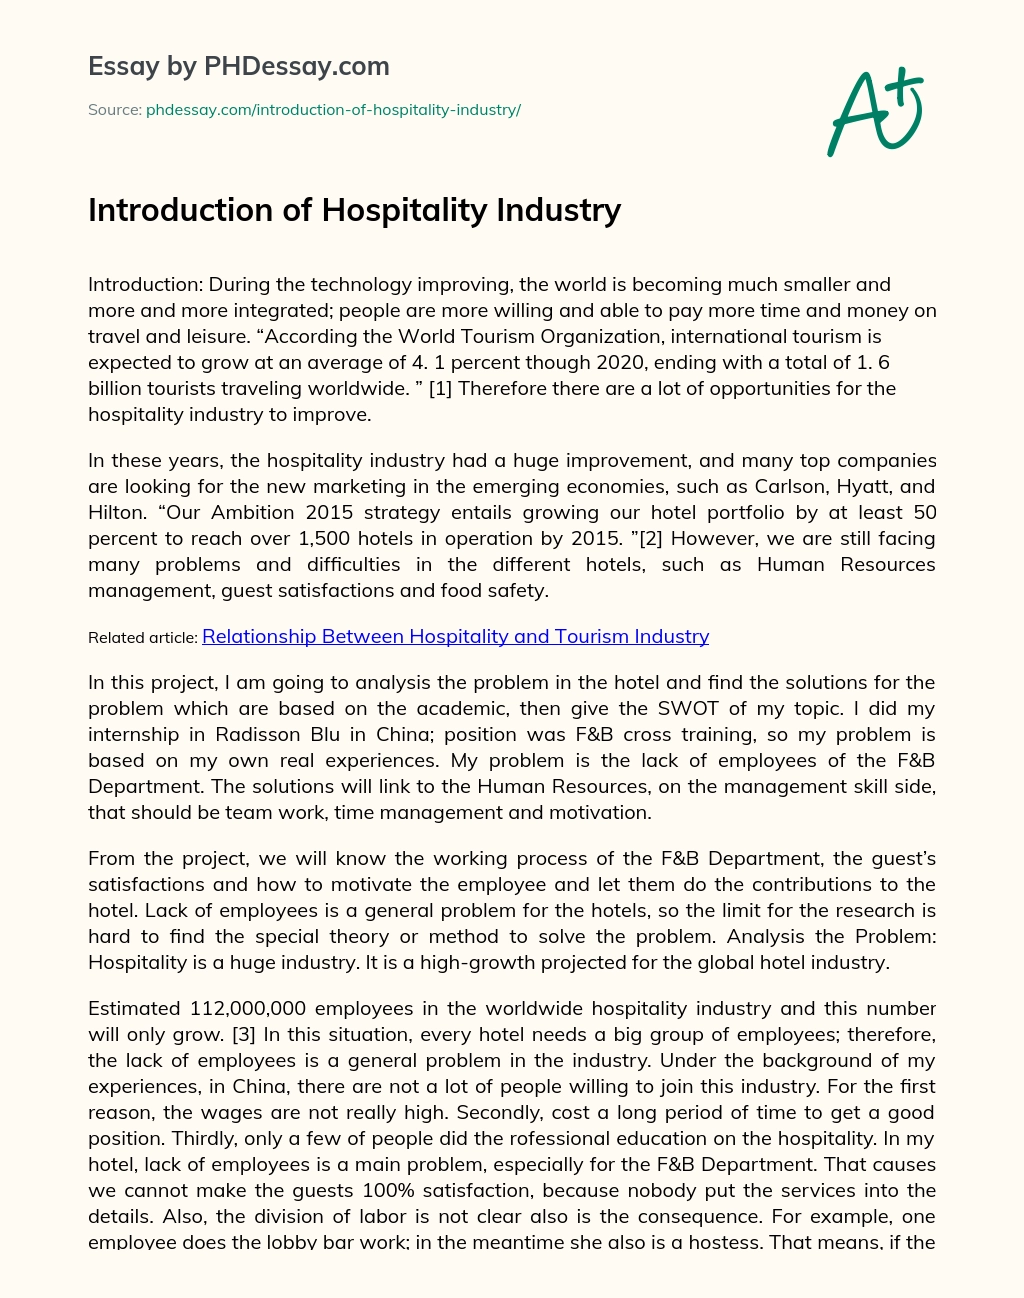 Introduction of Hospitality Industry essay